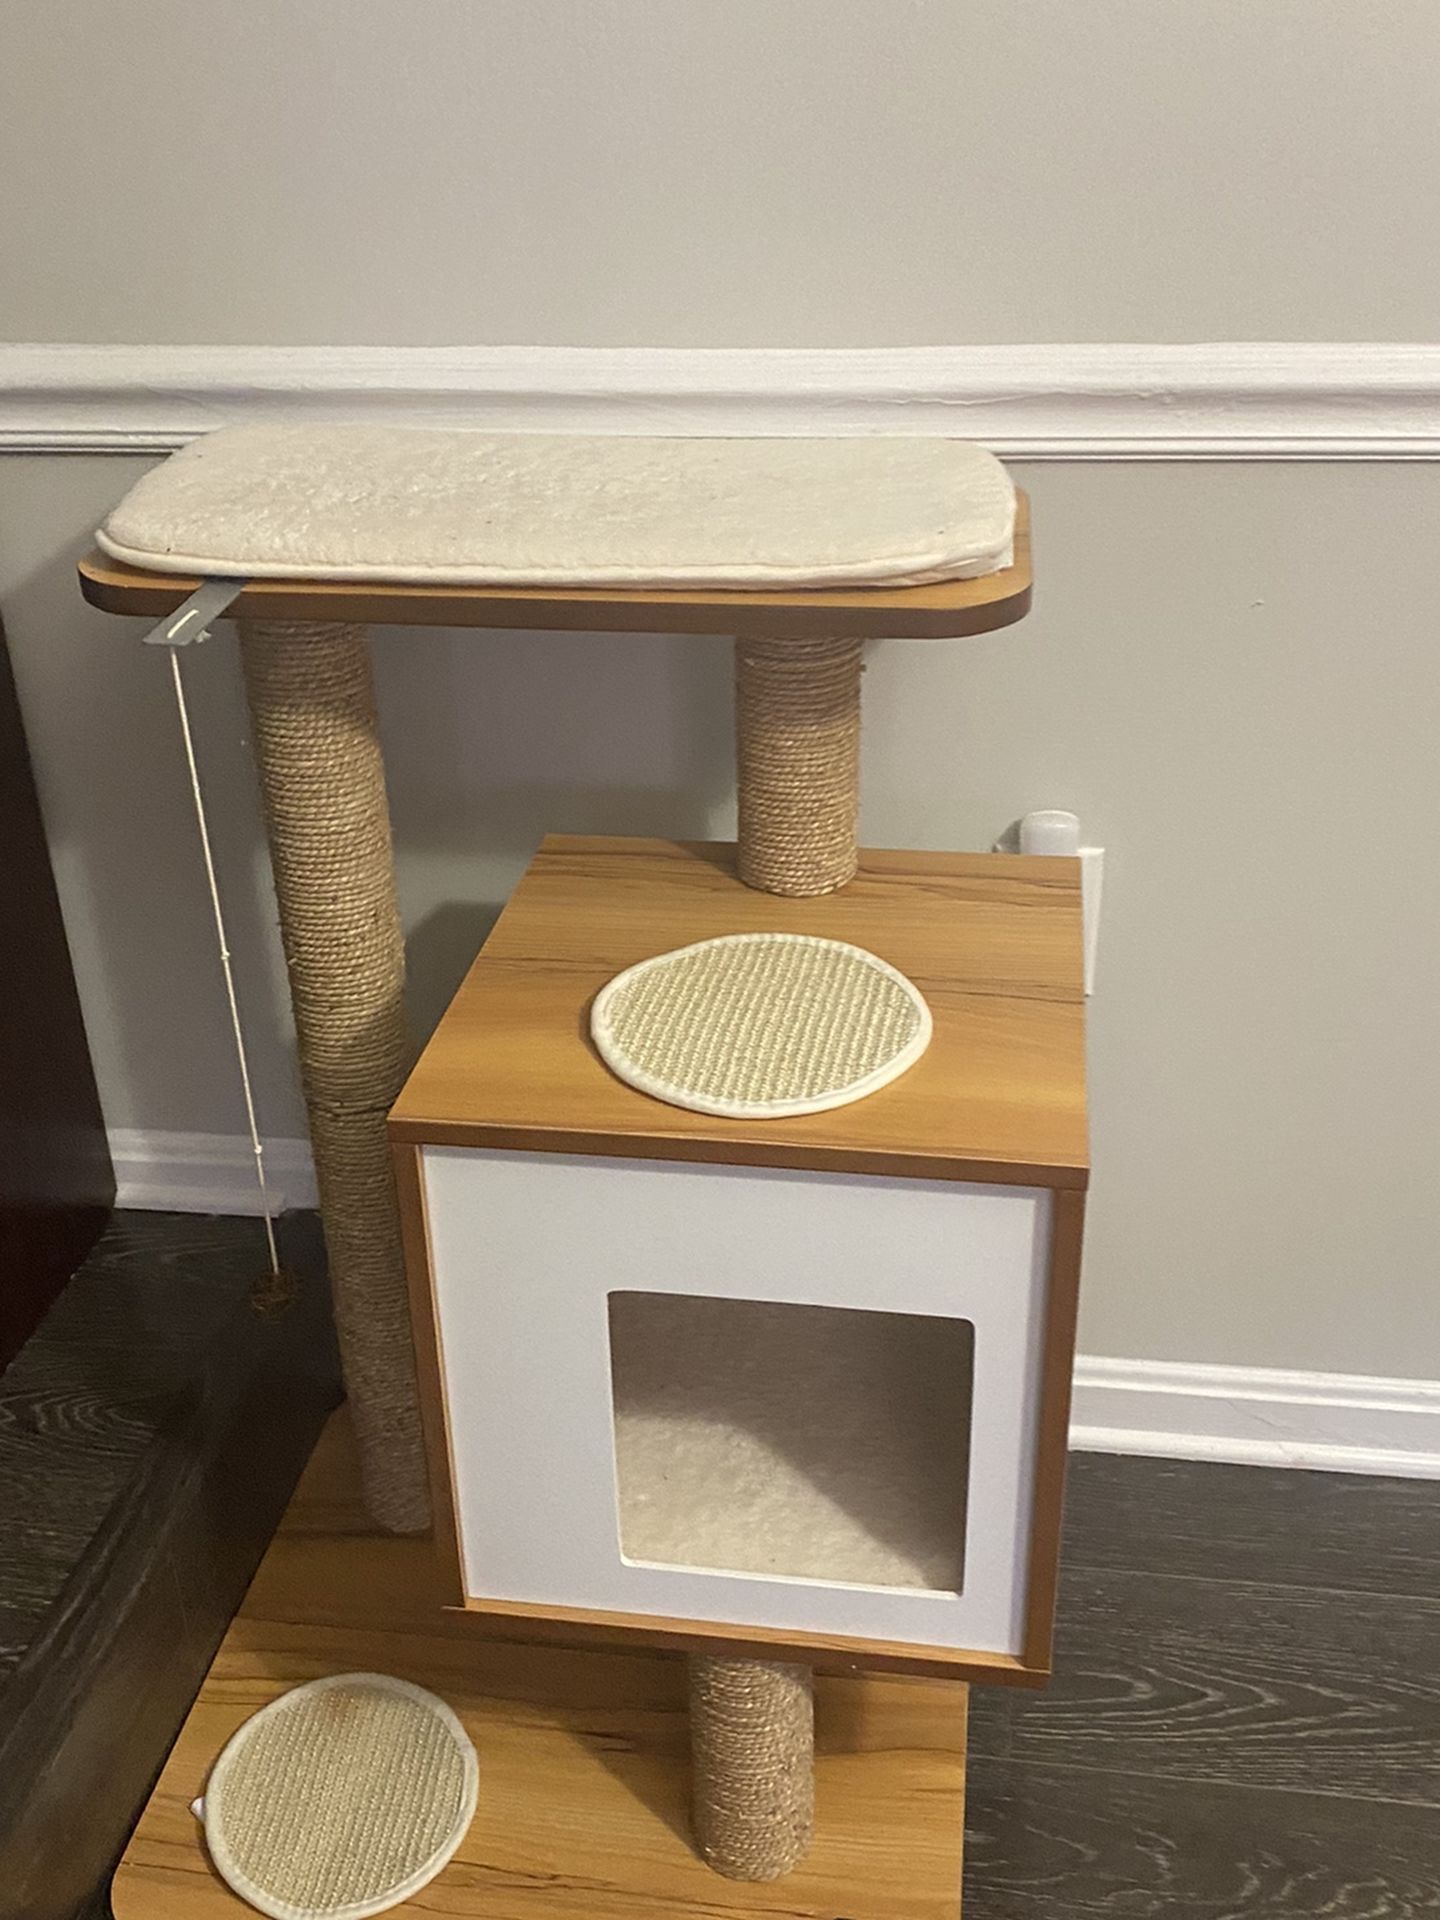 Cat Tree And Scratcher.